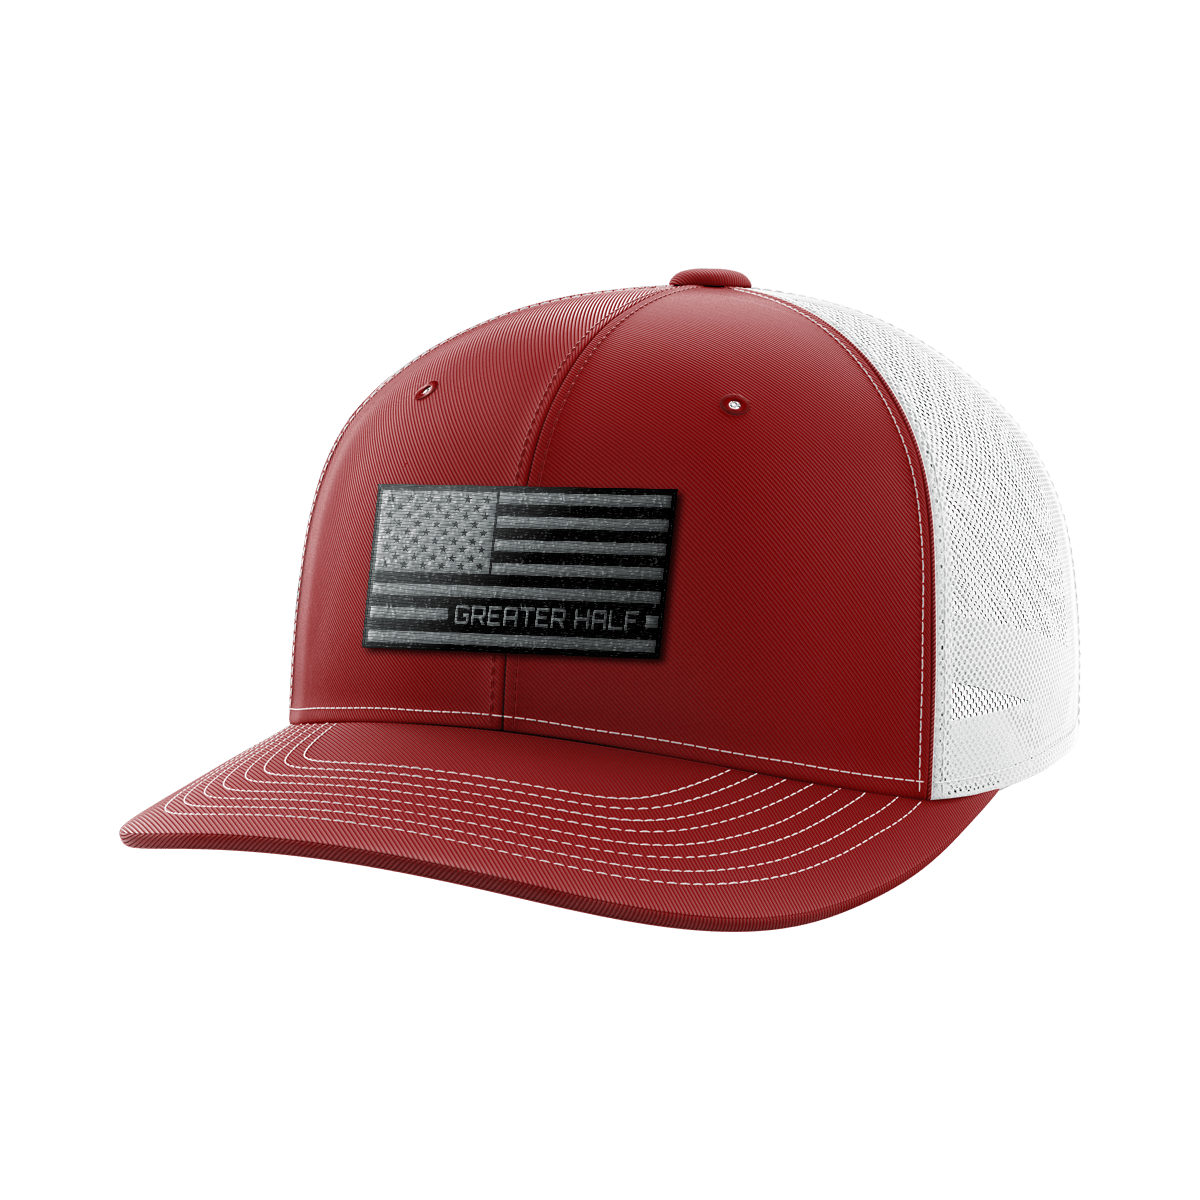 Thumbnail for USA Black Flag Woven Patch Hat - Greater Half